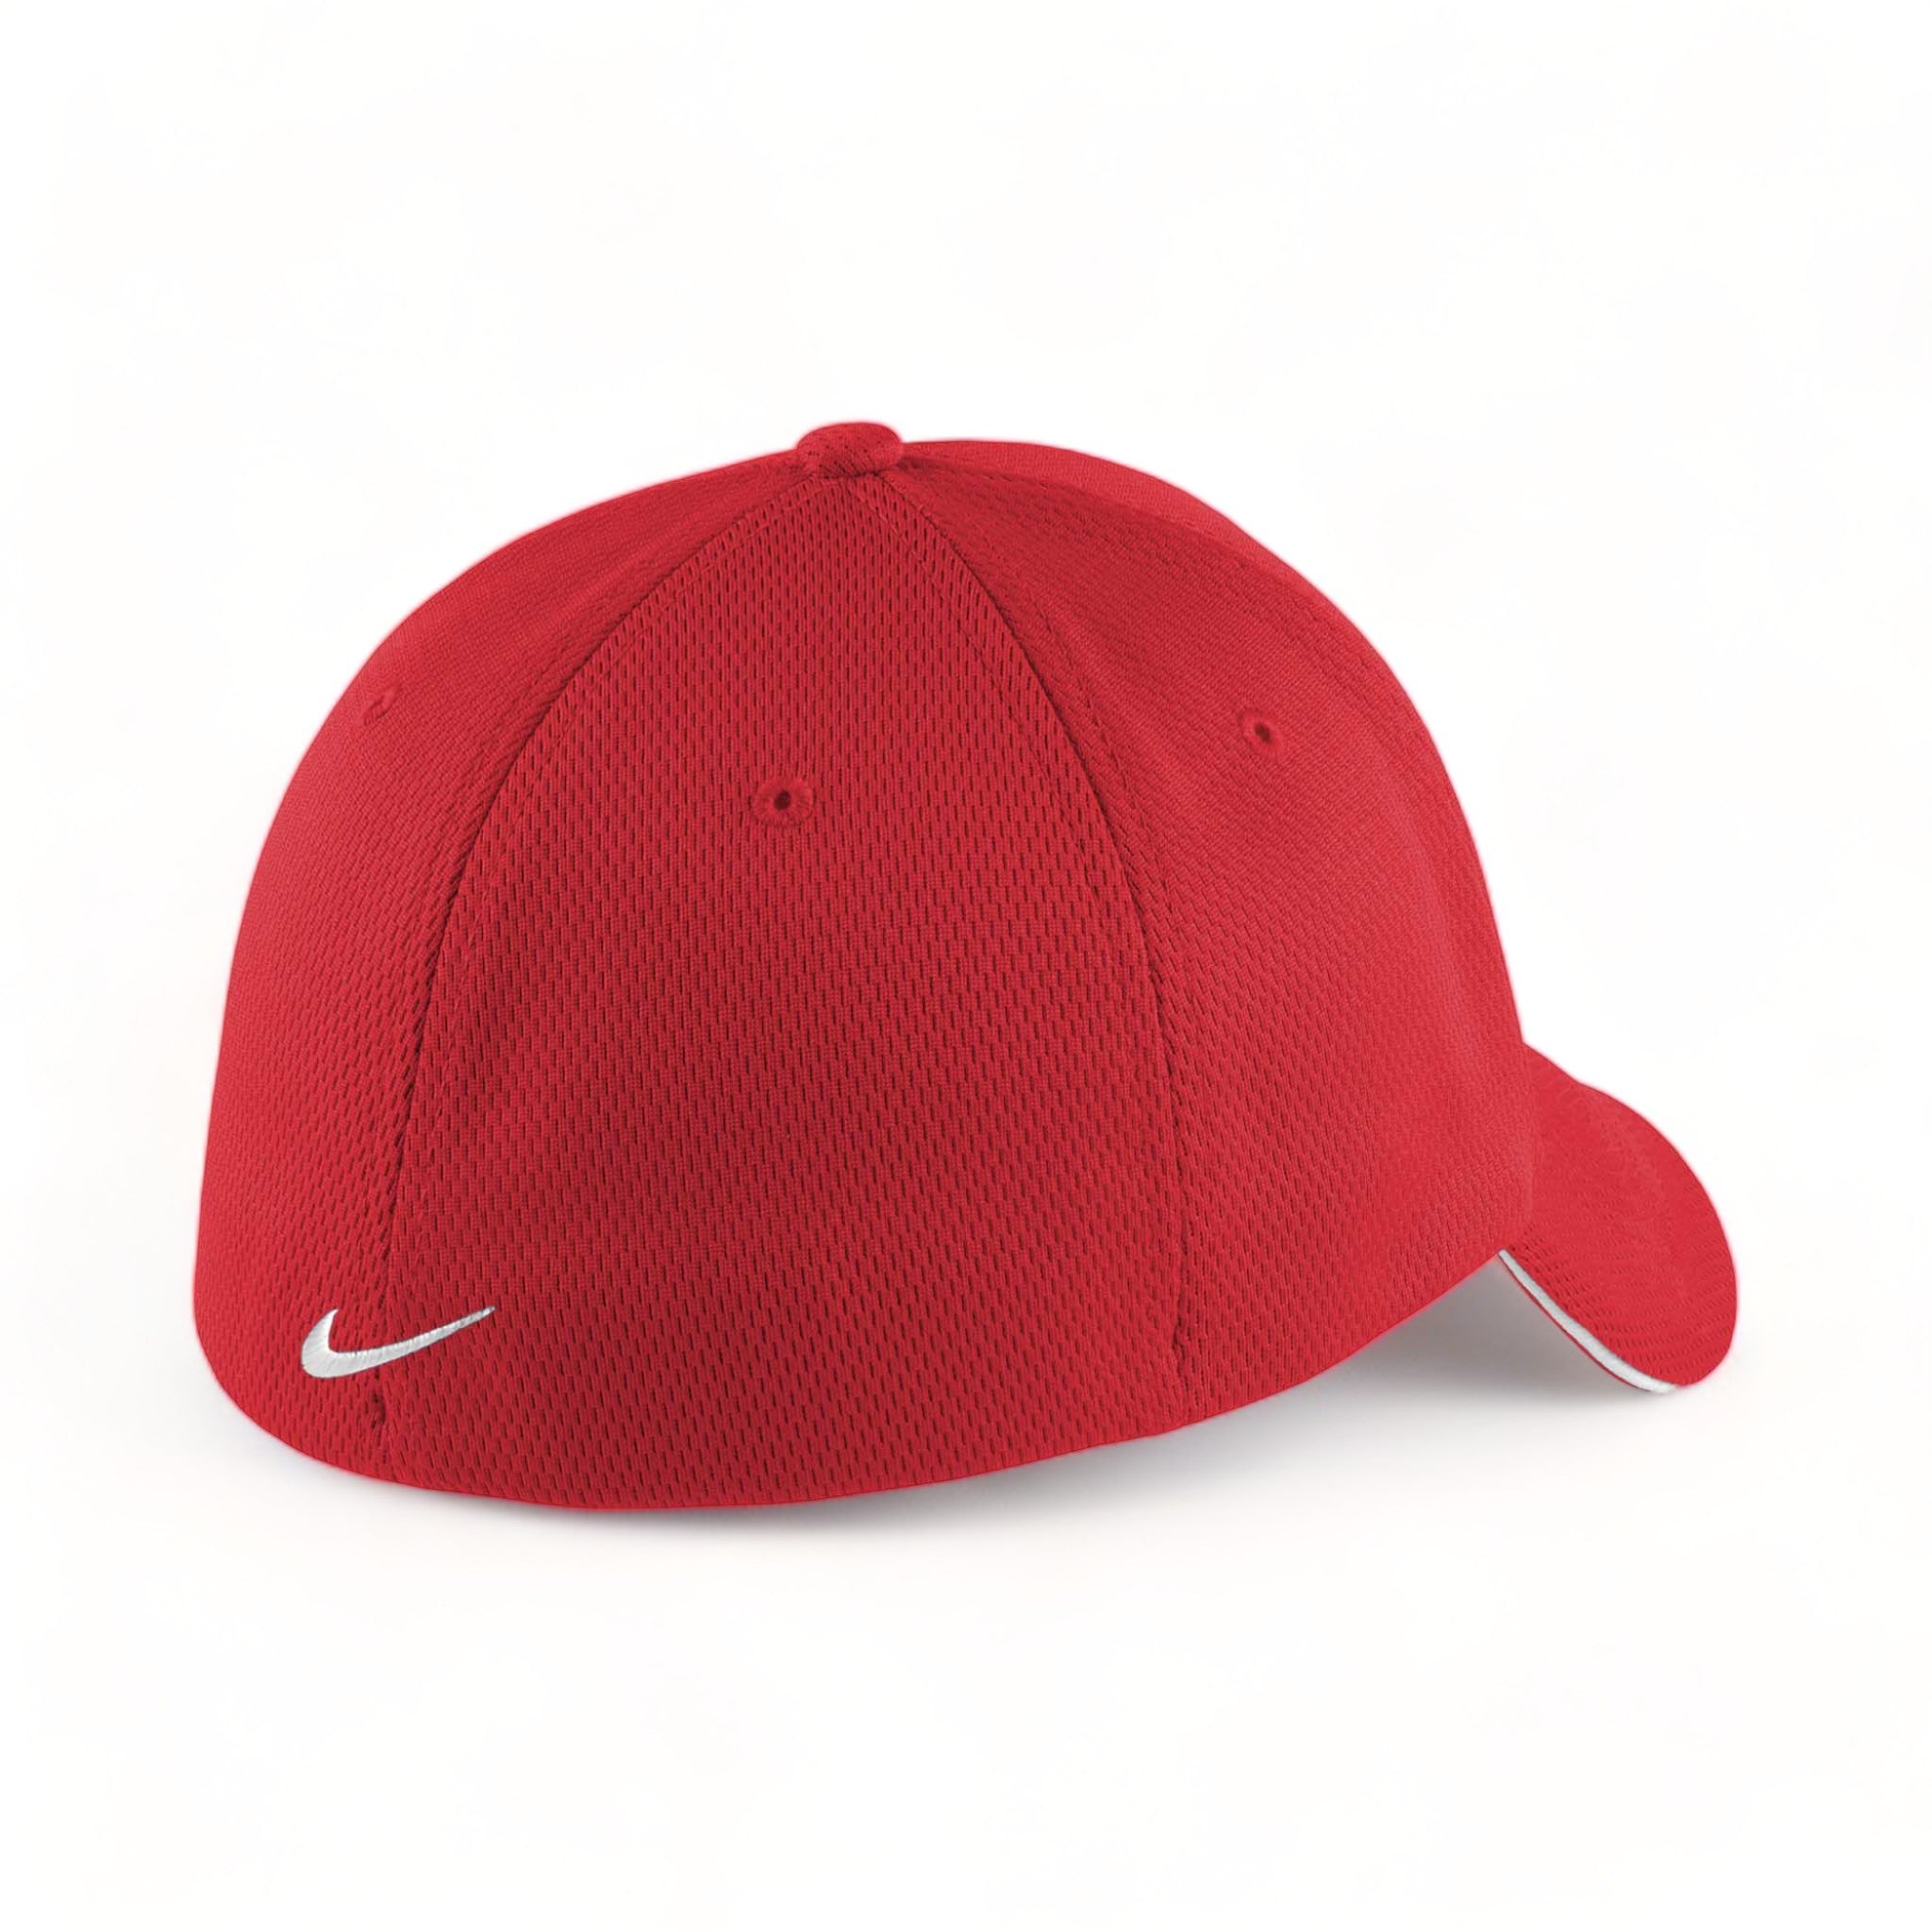 Back view of Nike NKFD9718 custom hat in university red and white